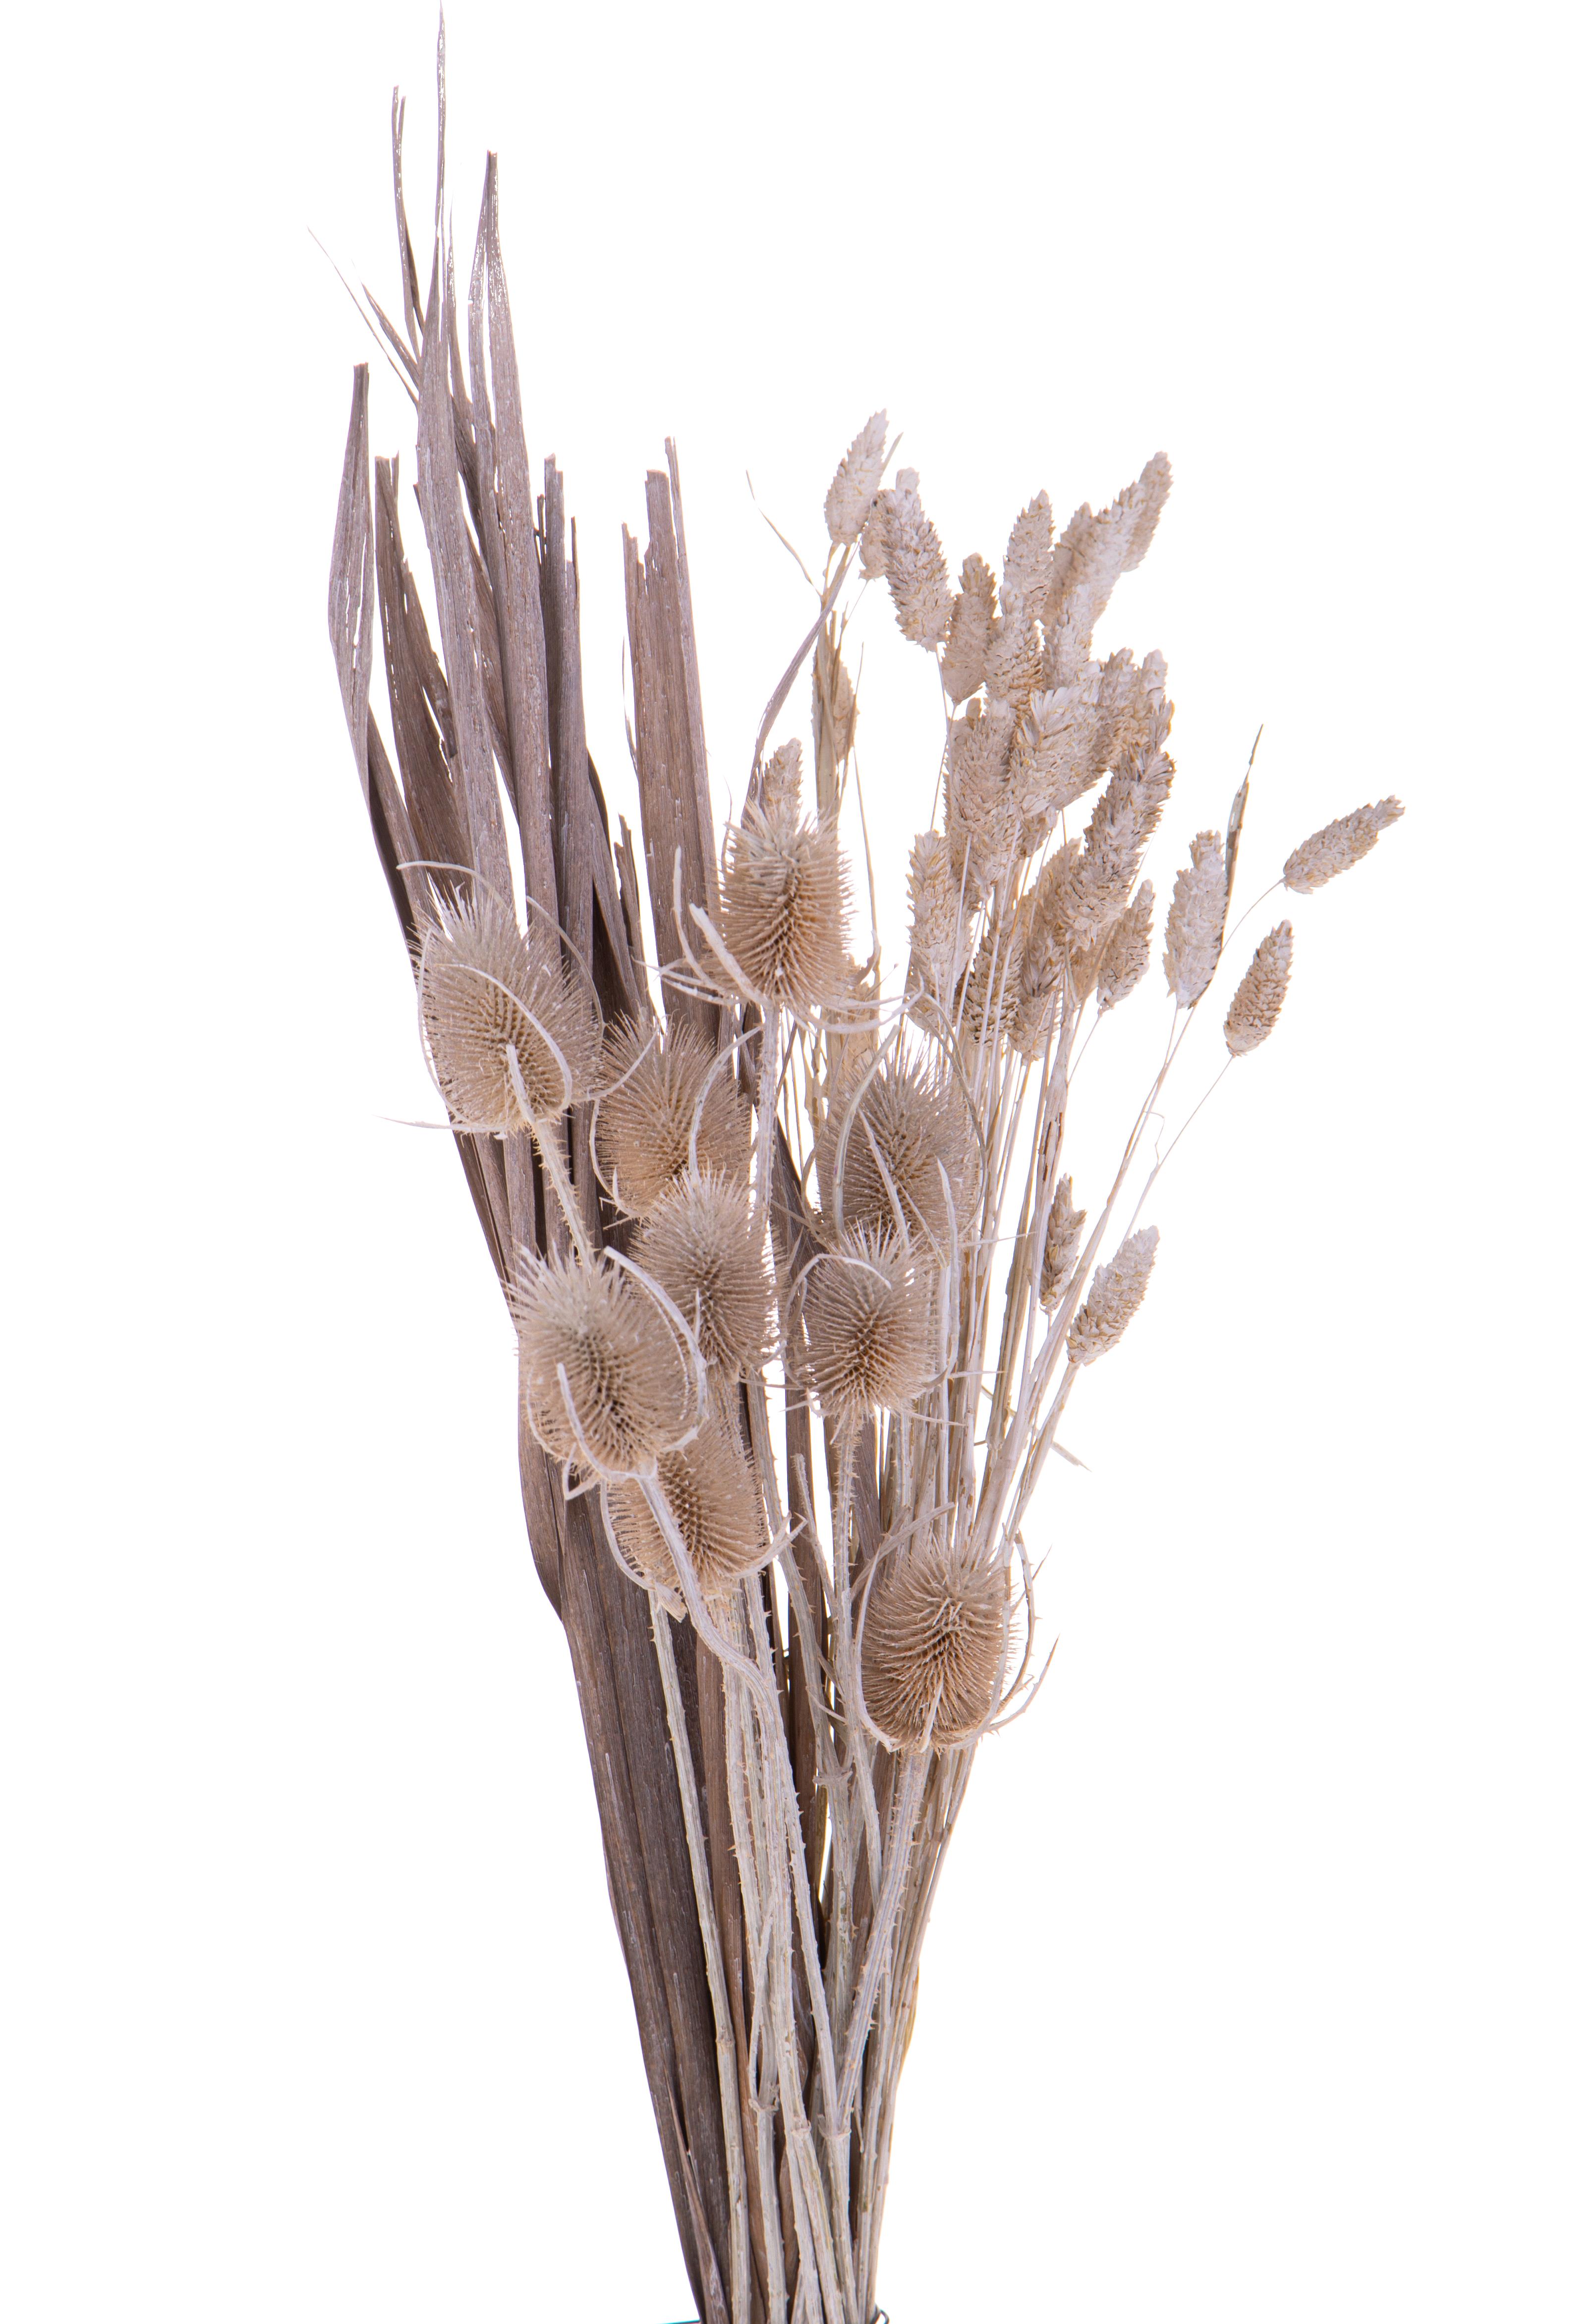 NATURAL PRODUCTS DRIED FLOWERS AND ERBS, BUSH FLOWERS DECORATIONS, MAZZO AZZORTITO CALCINATO